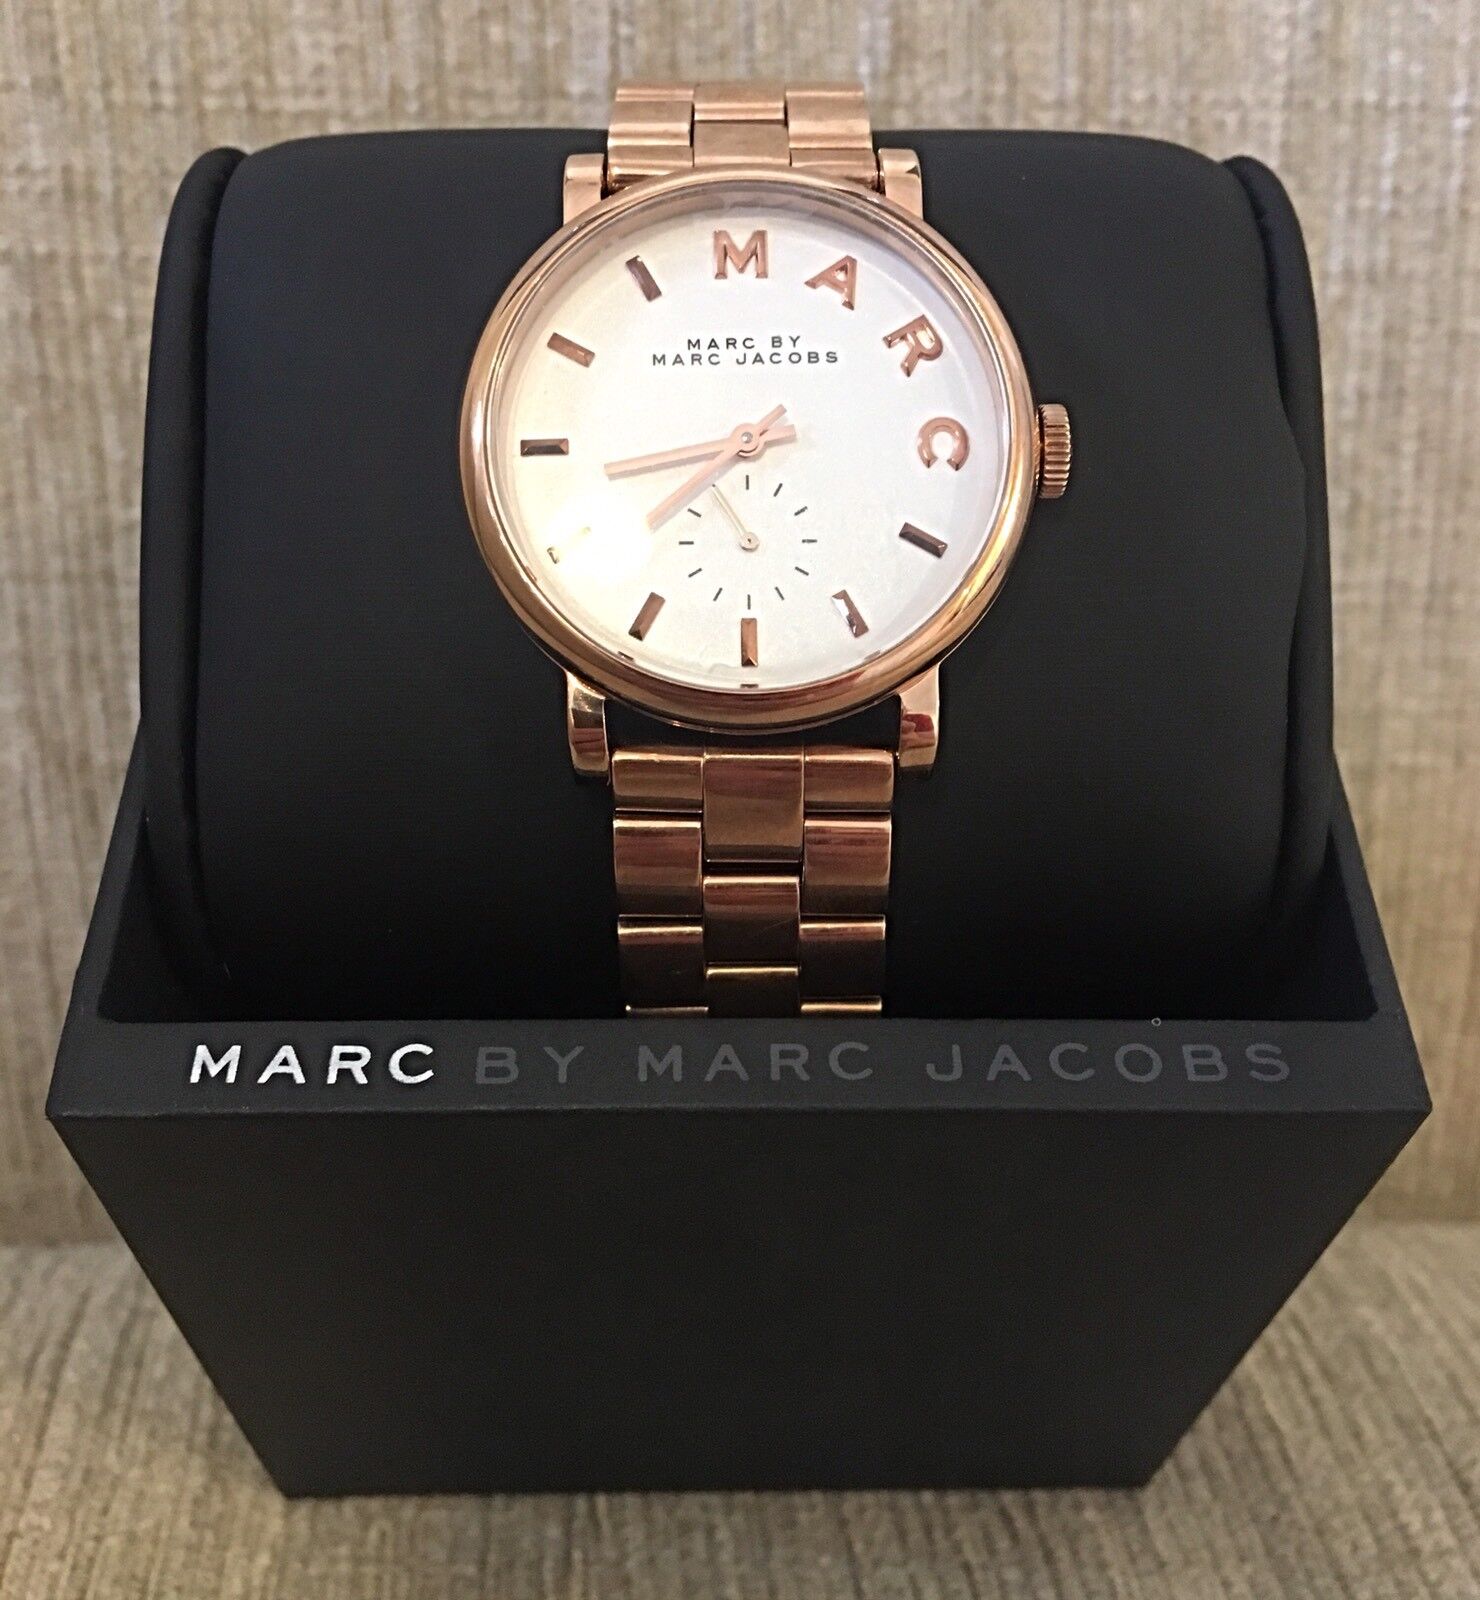 Marc Jacobs Baker White Dial Rose Gold Stainless Steel Strap Watch for Women - MBM3244